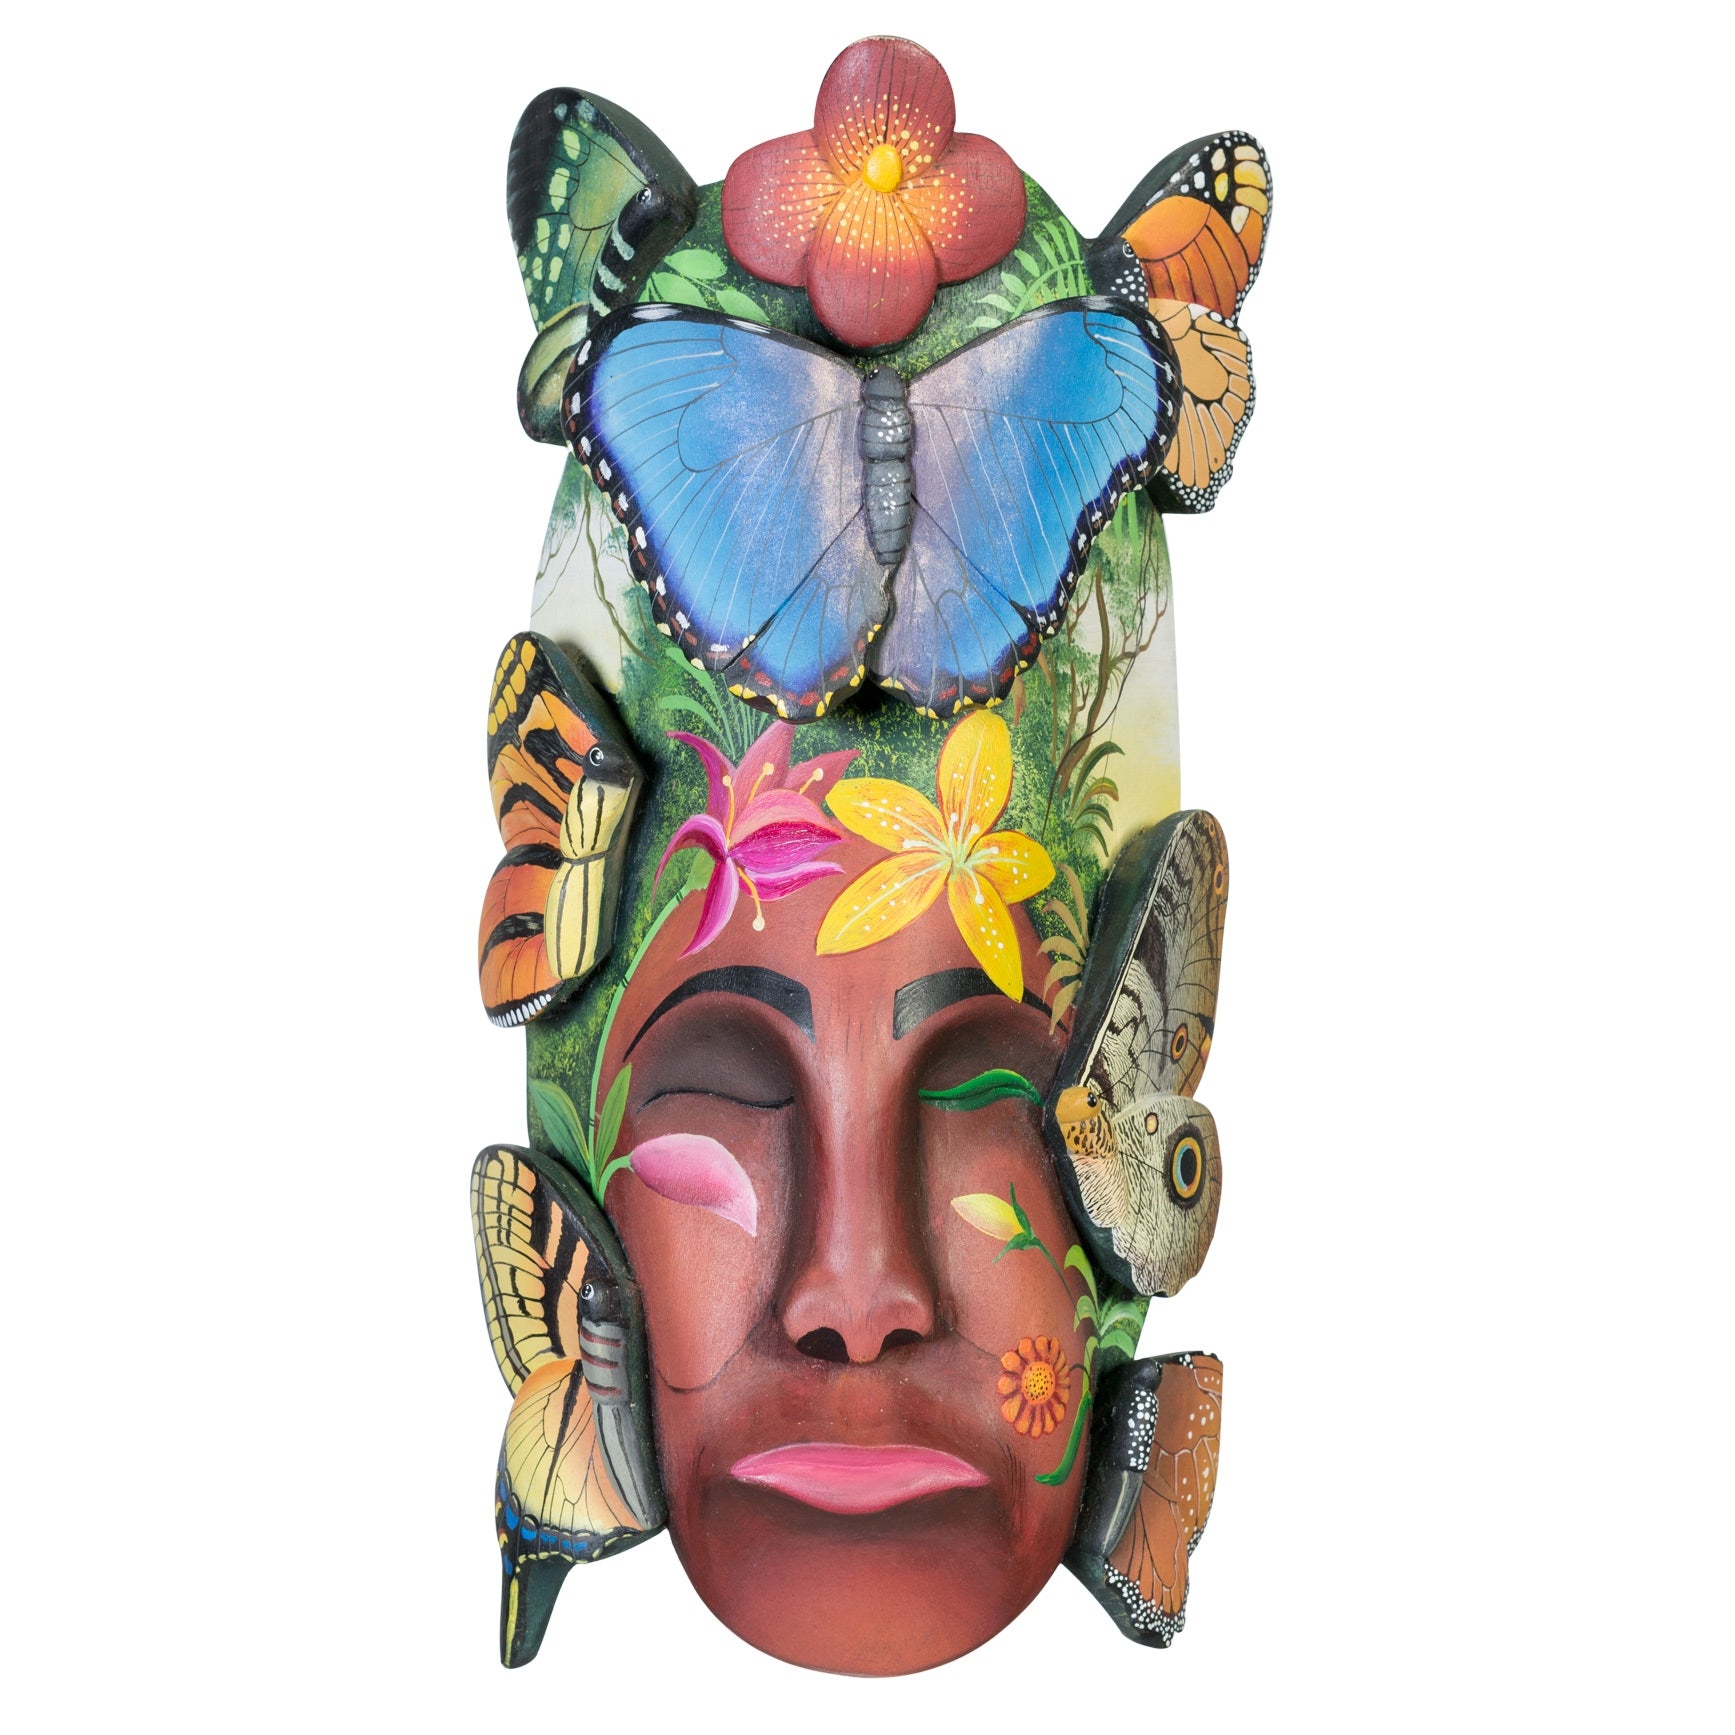 G069 Head Full of Hope by Neftali Rojas Morales and Esteban Morales Lazaro Balsa Wood Mask or Totem from Boruca, CR with size